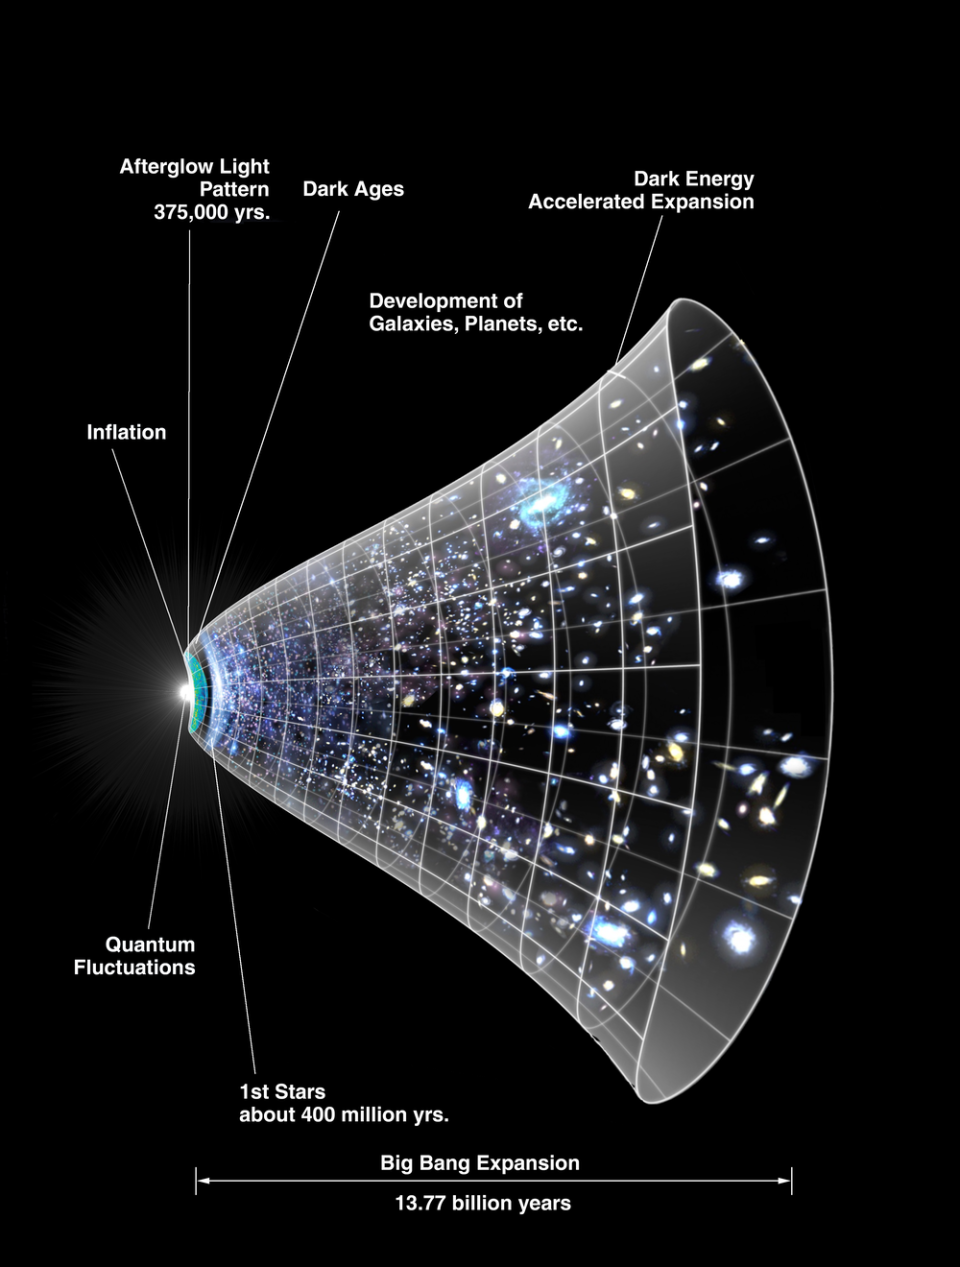 The expansion of the universe over time.